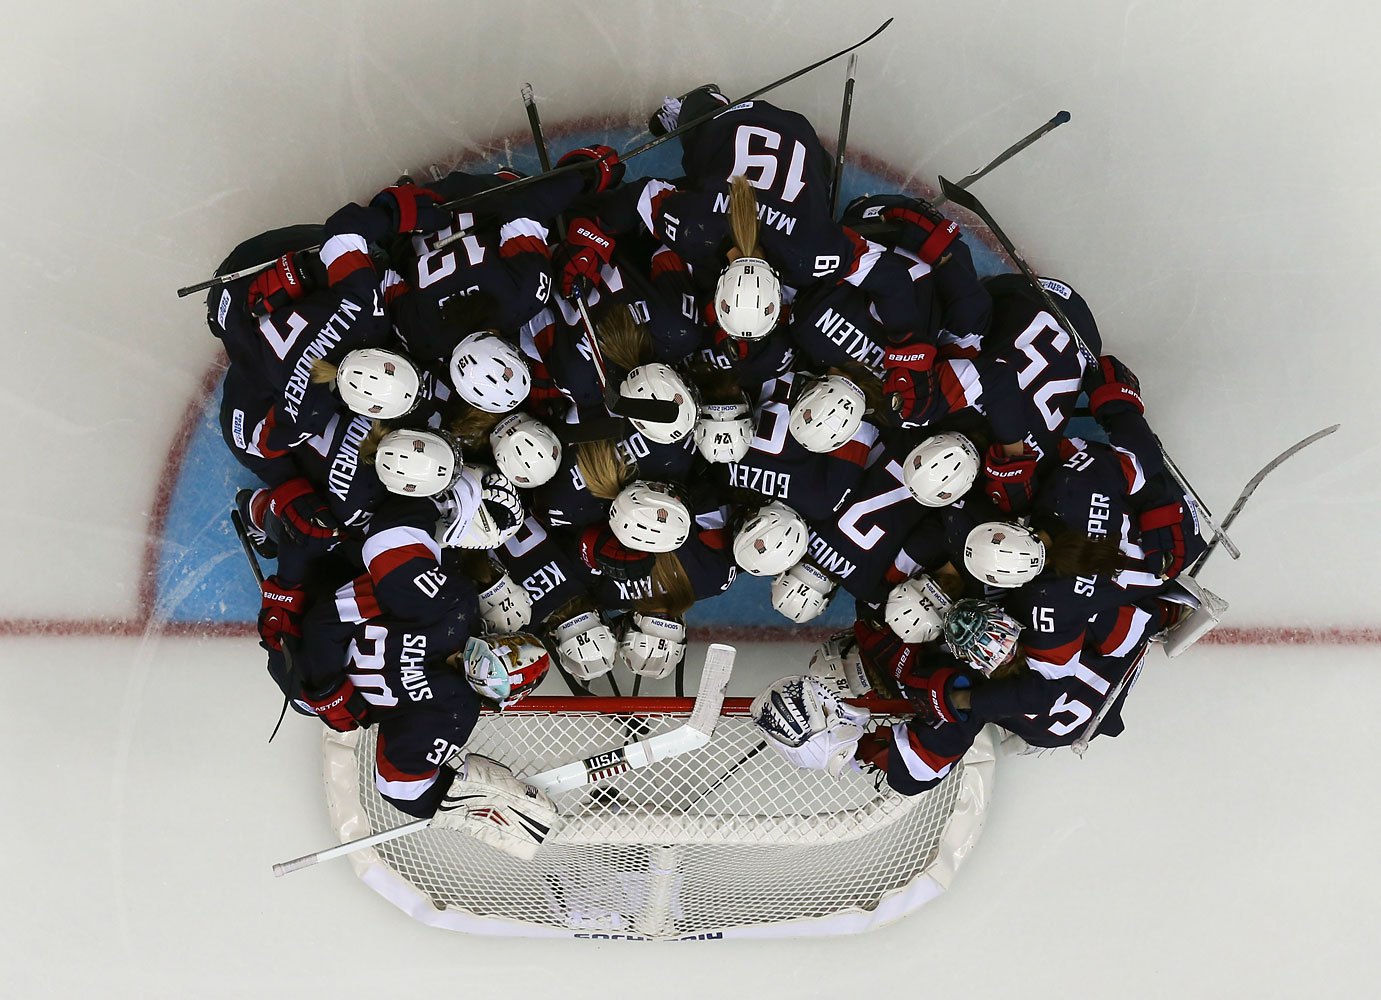 Members of USA's women's ice hockey team huddle around USA's goalie Molly Schaus before their women's preliminary round hockey game against Switzerland at the Sochi 2014 Winter Olympic Games Feb. 10, 2014.